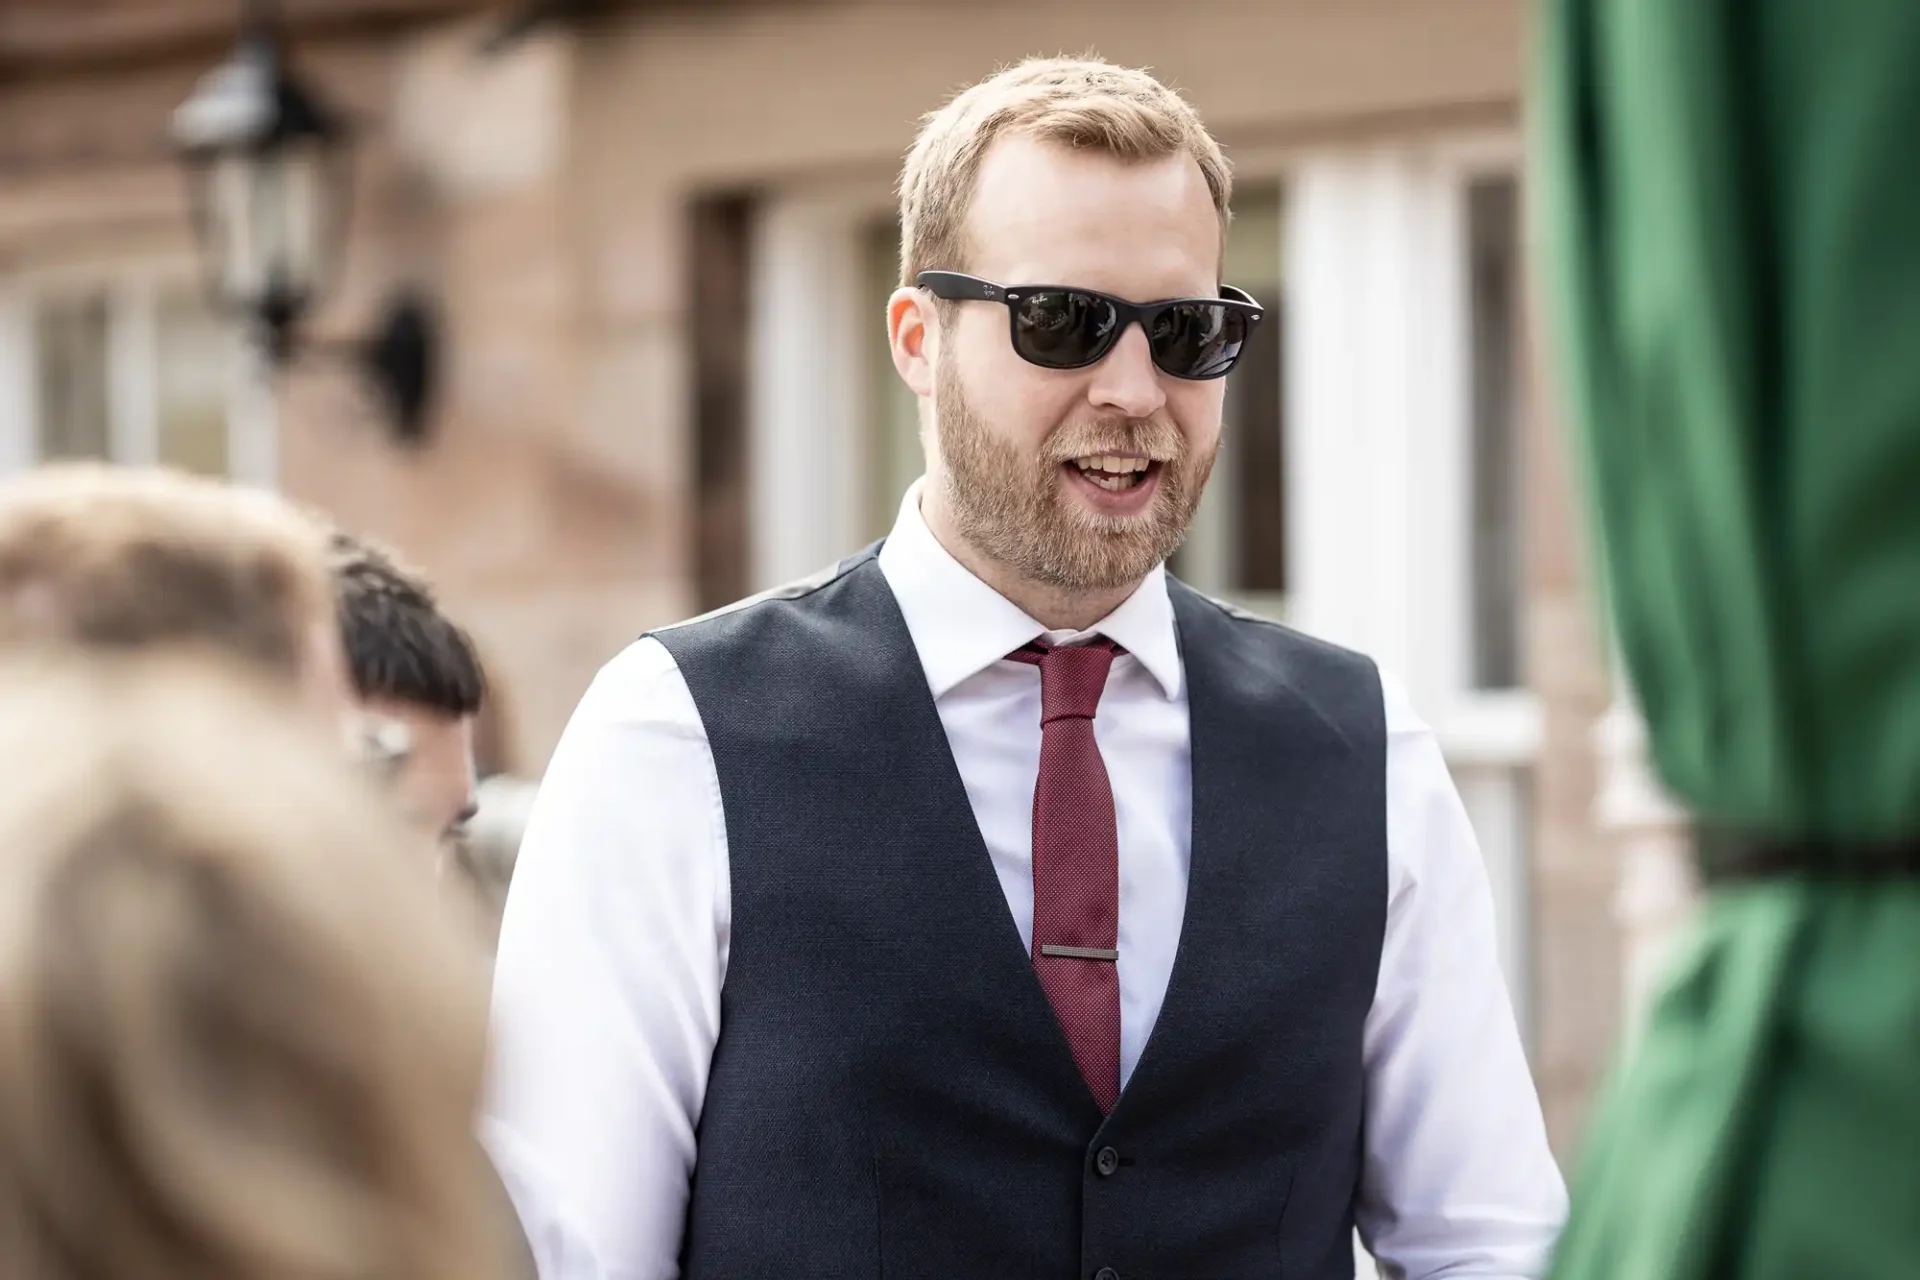 A man in a tailored vest and tie wearing sunglasses talks to people outdoors.